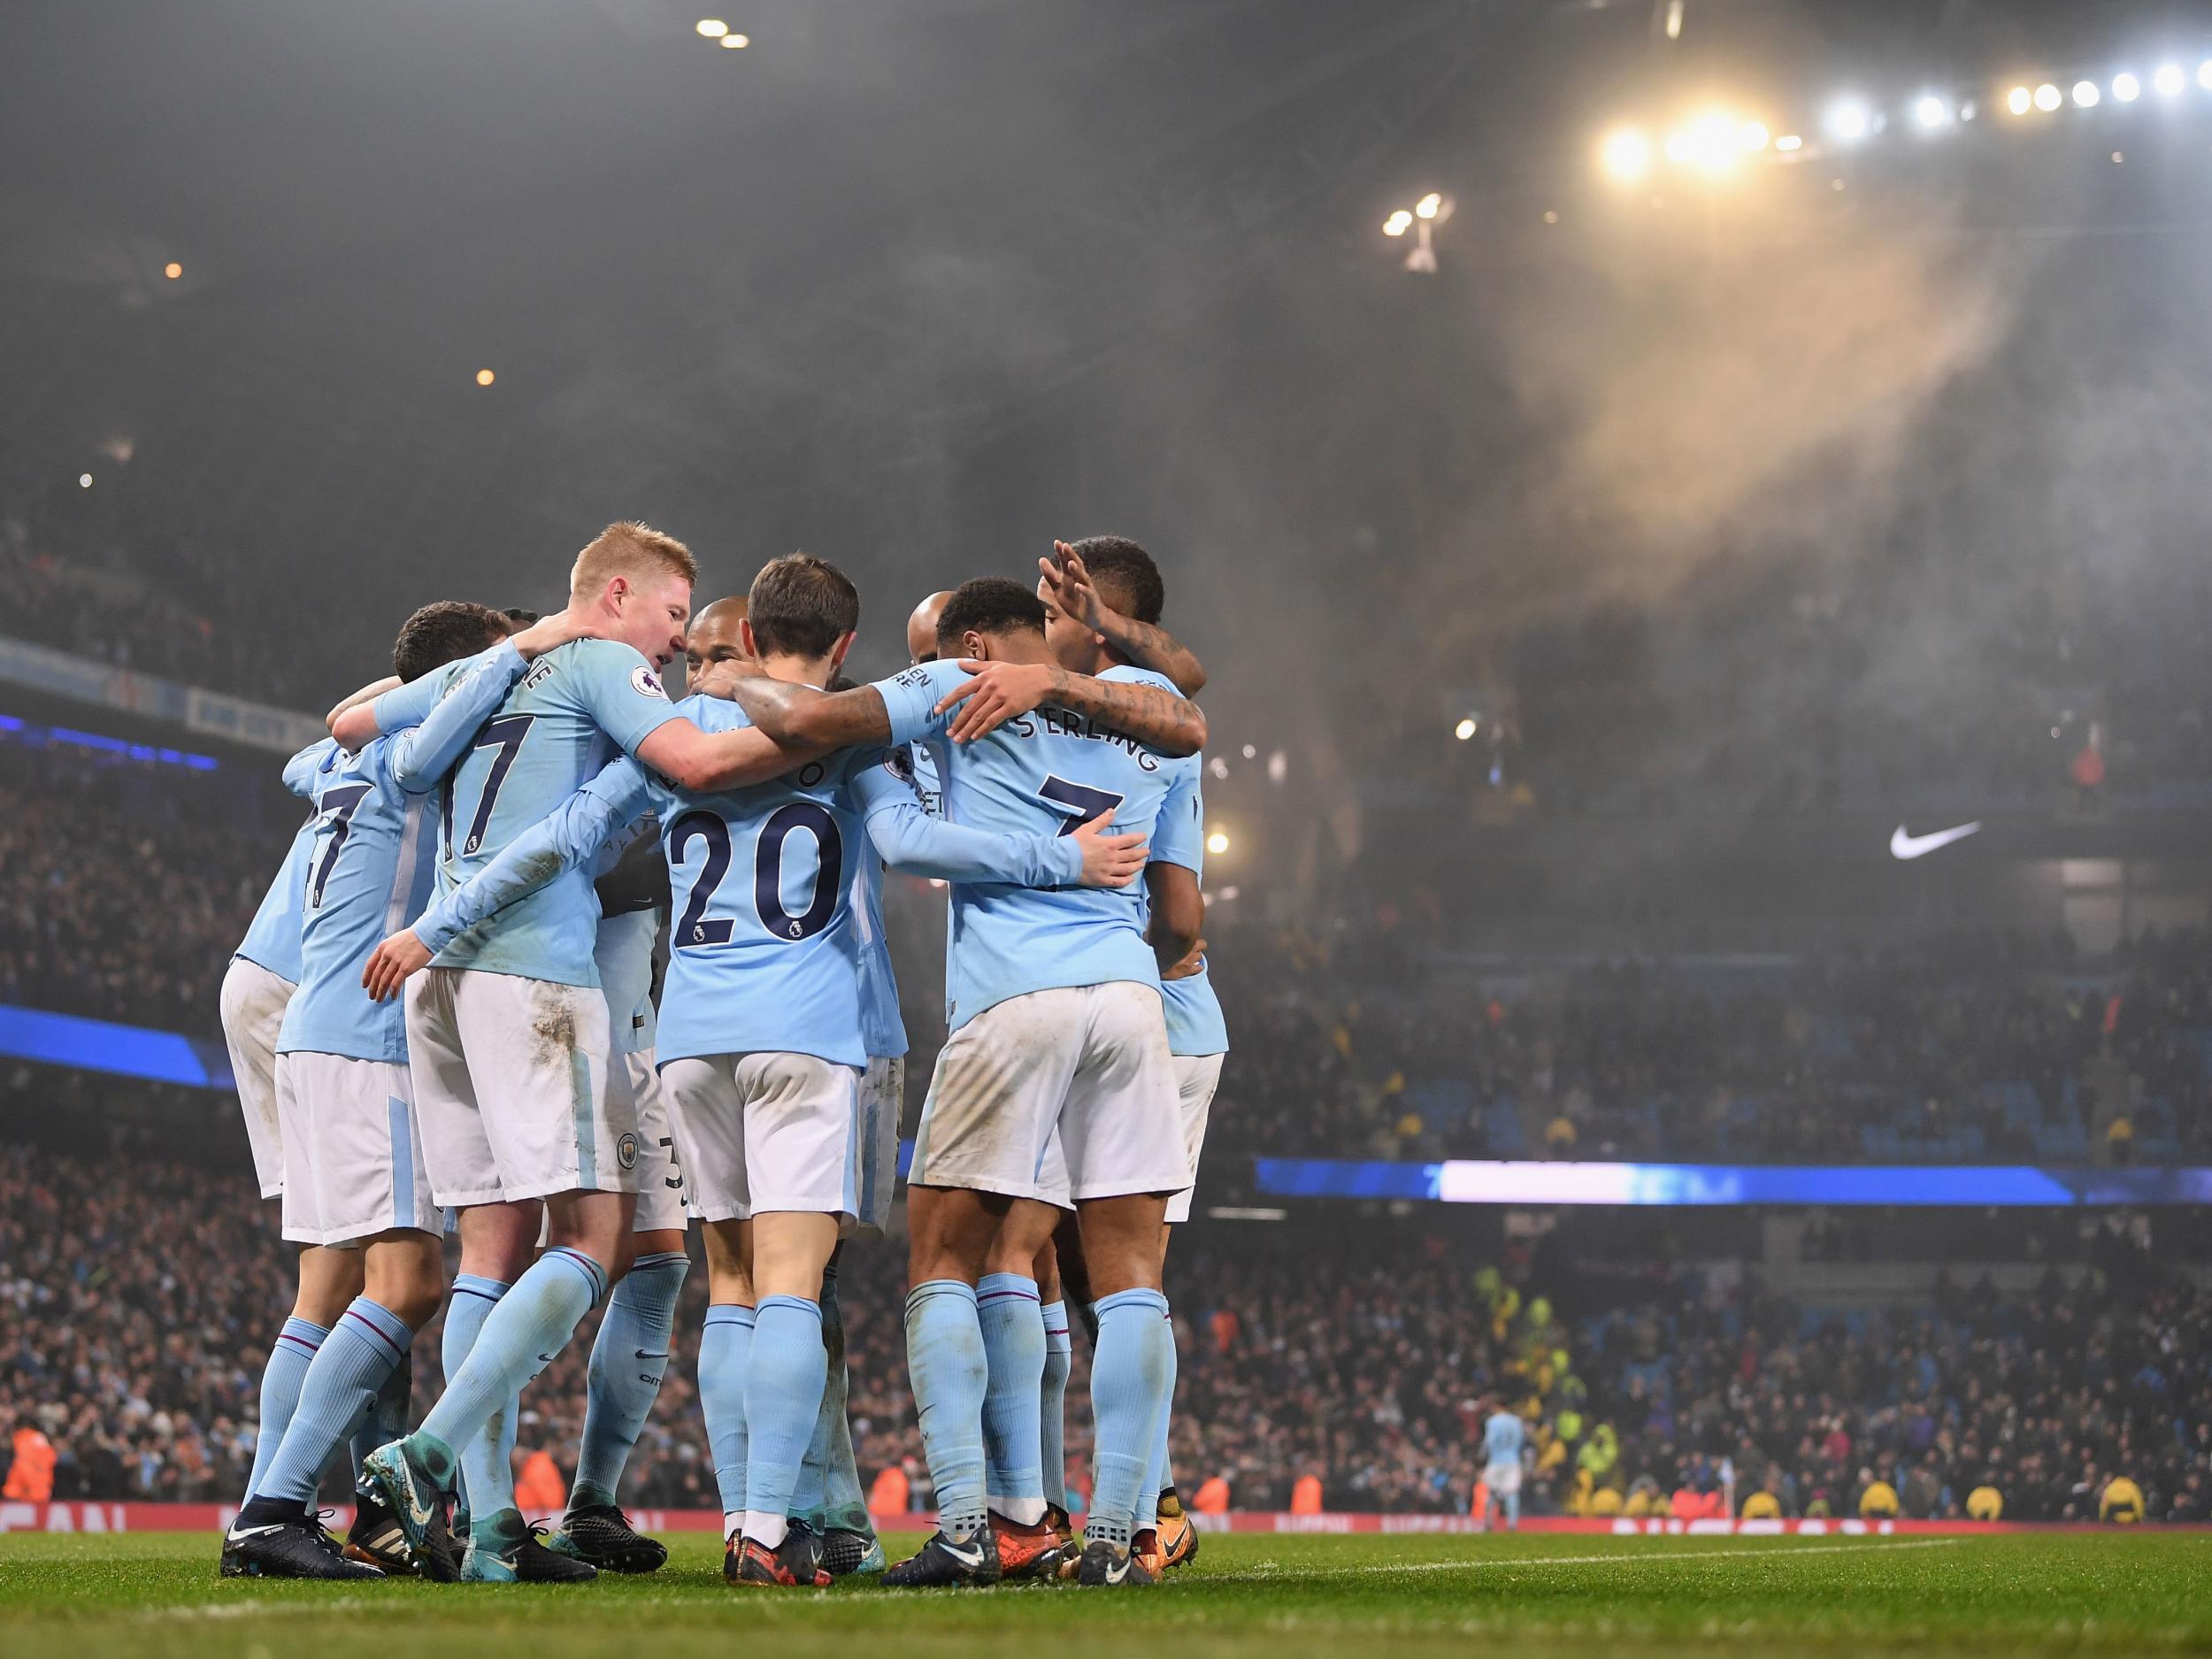 Manchester City have a better record after 18 league games than any of Pep Guardiola's previous sides